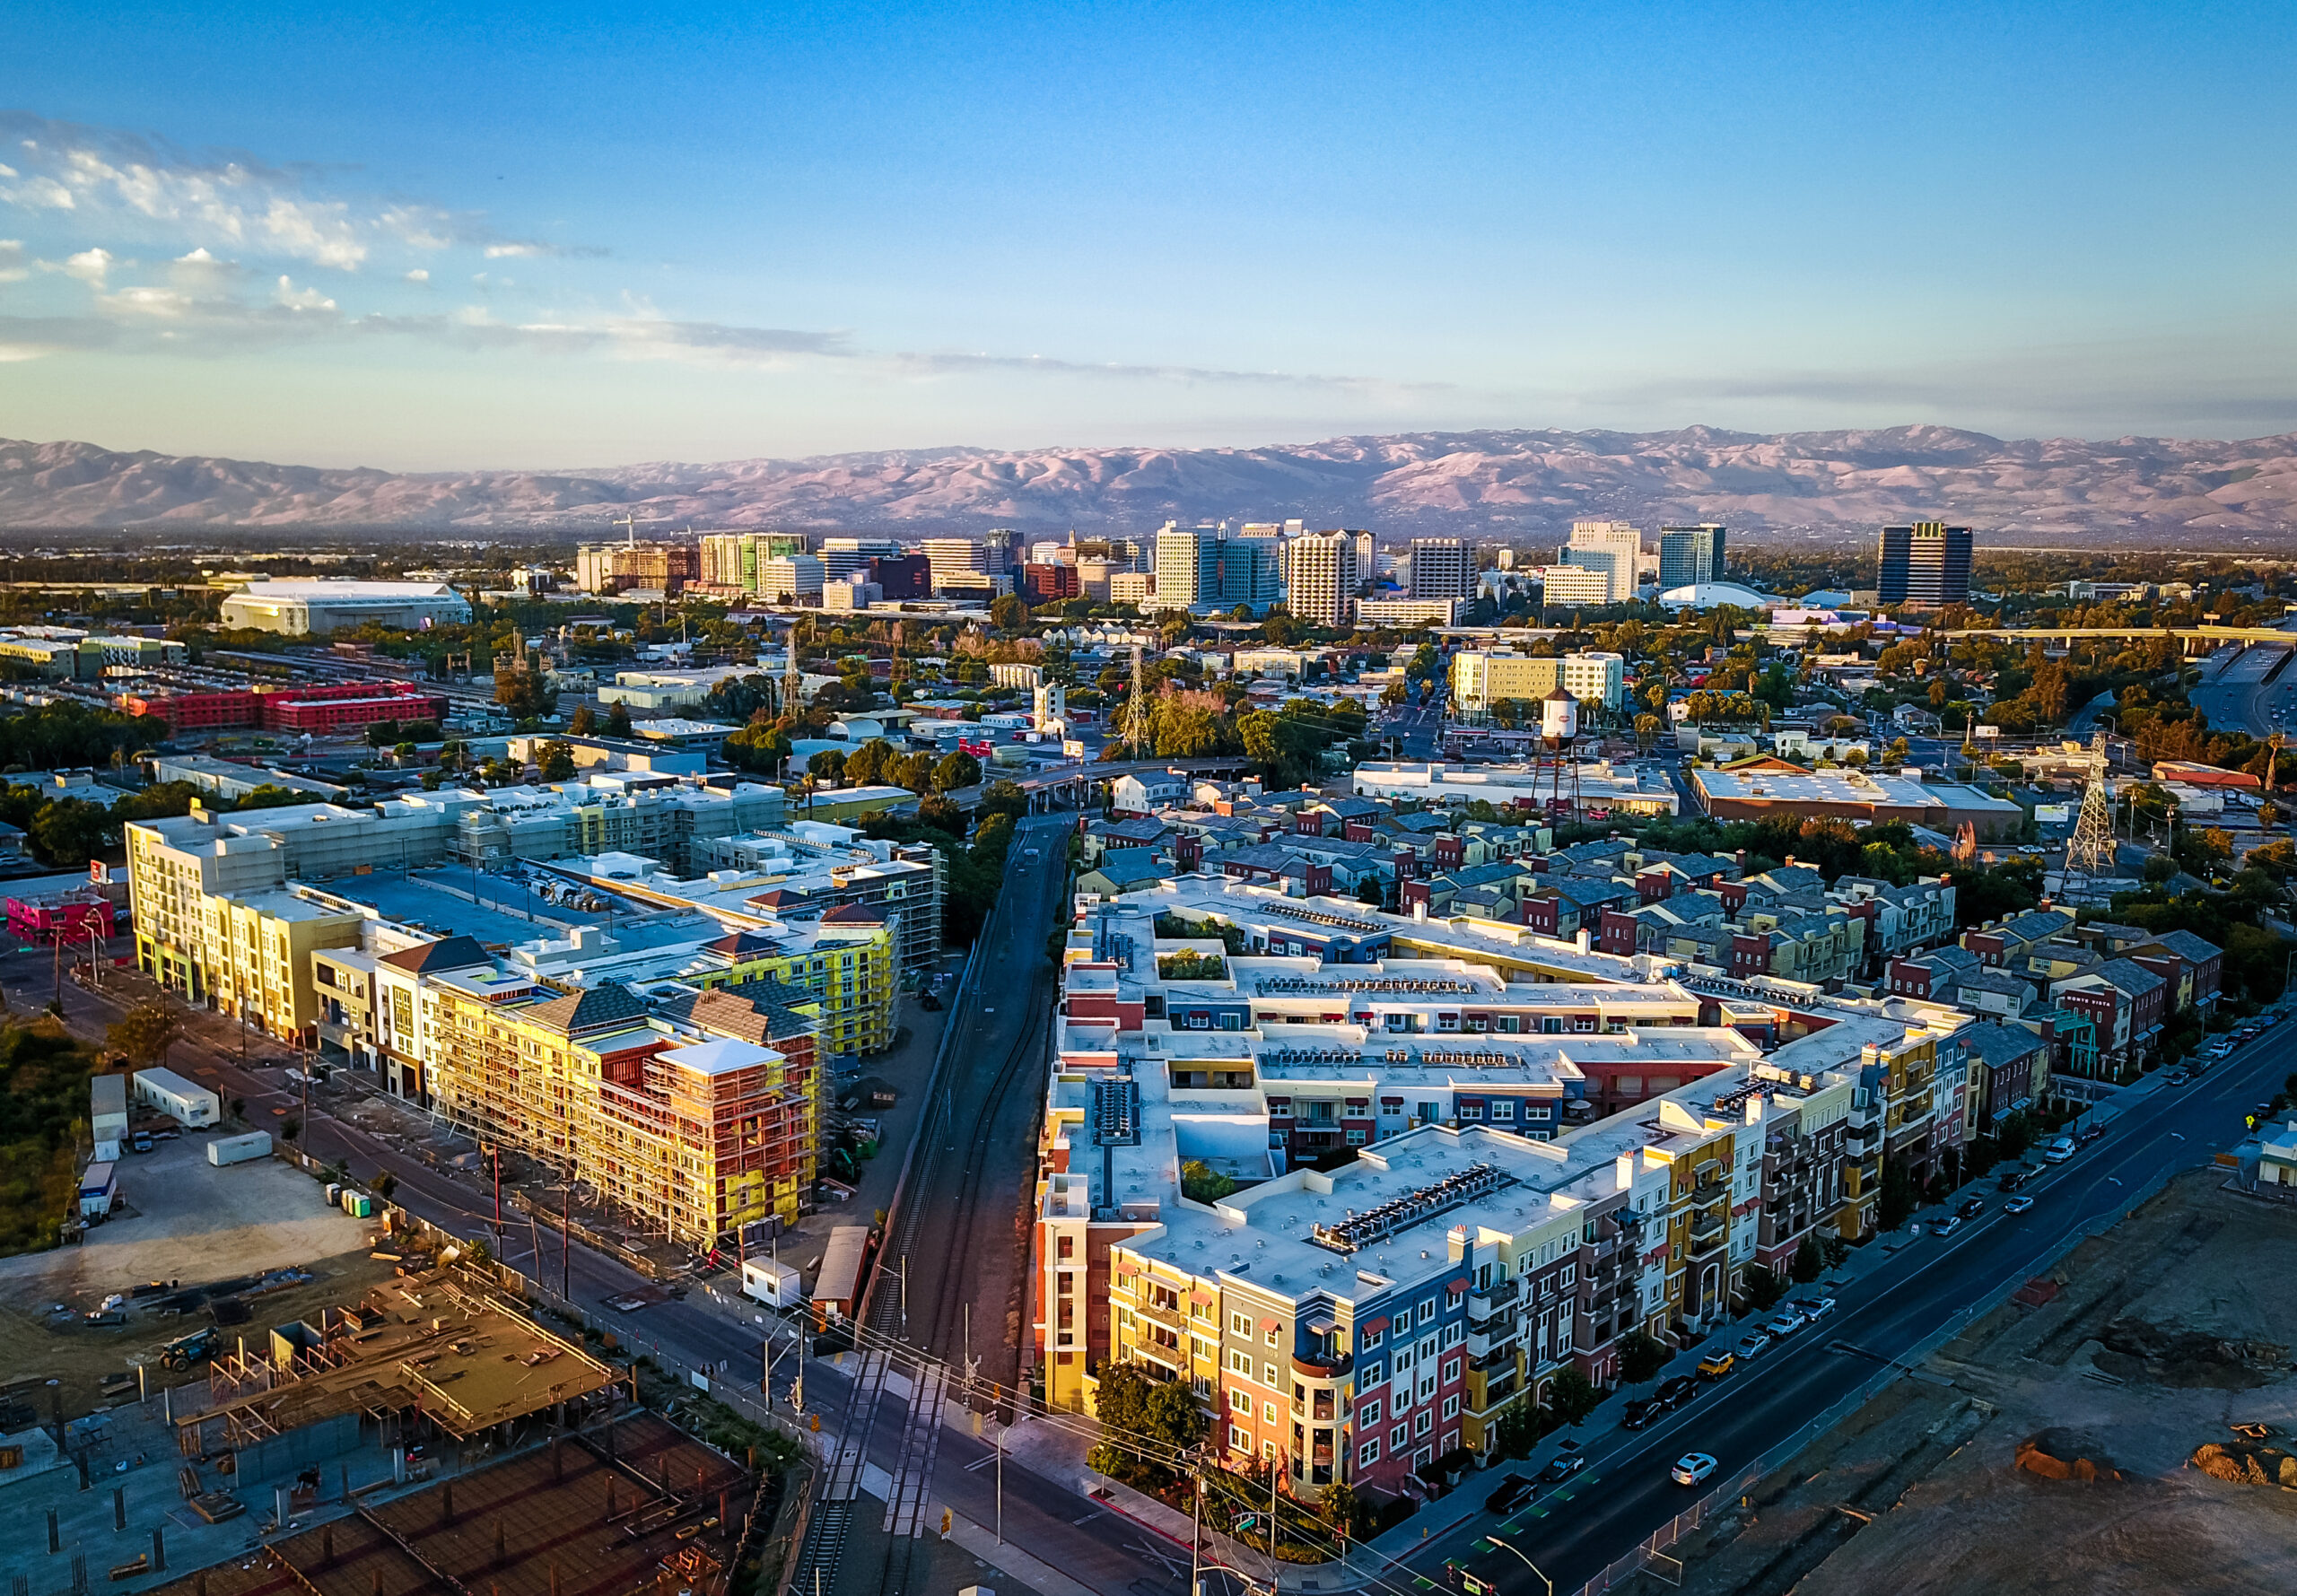 Aerial view of a colorful urban landscape at sunset with mountains in the background.